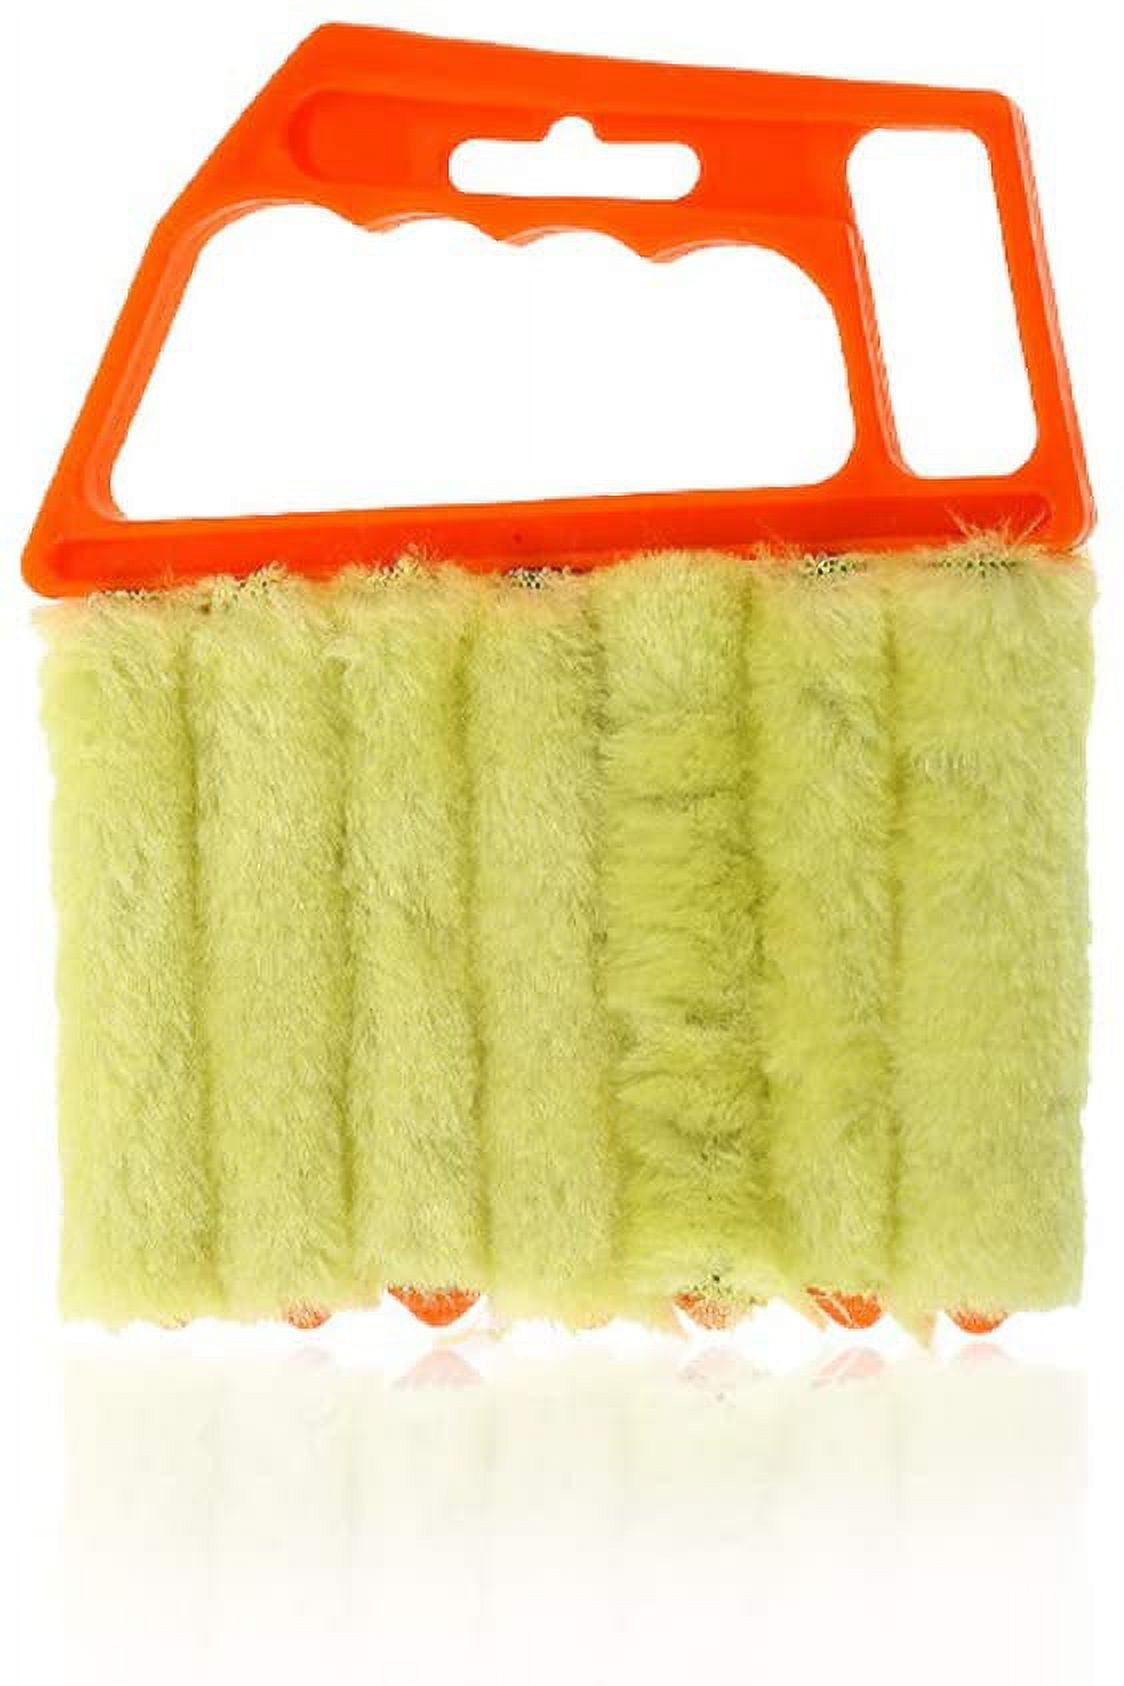 6Pcs Blind Duster Brush Groove Gap Cleaning Tool 6 Microfiber Sleeves -  Red, Green, Blue - Bed Bath & Beyond - 35516040